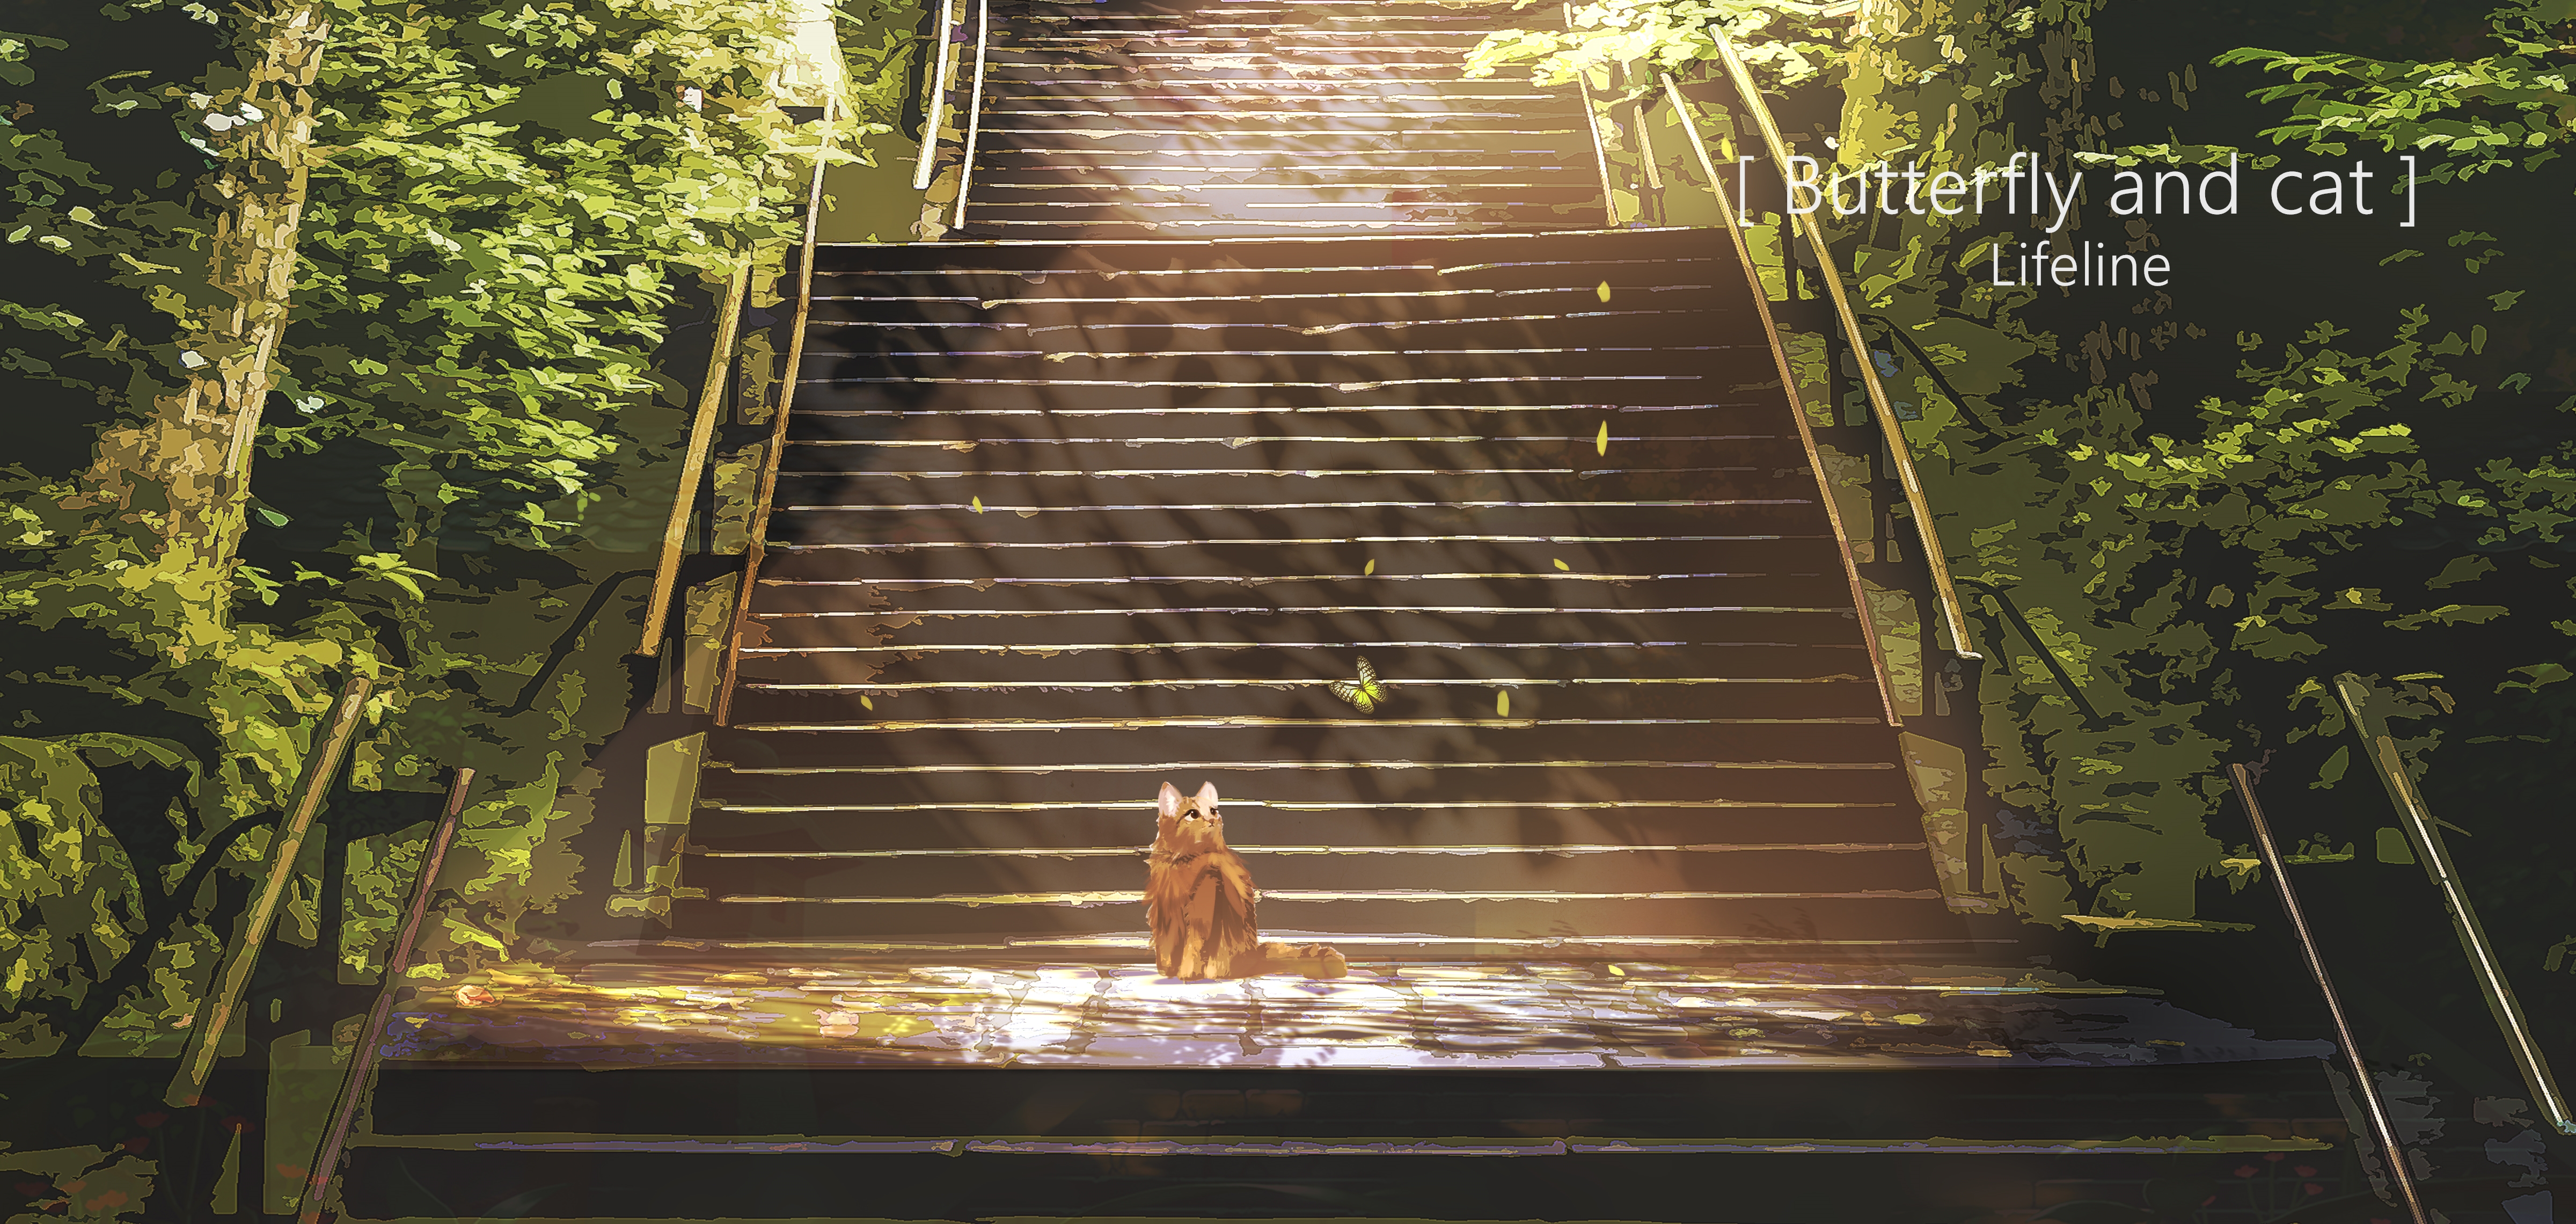 Made an edit of Nuxill's edit of the stairs from Kimagure After : r/DDLCMods